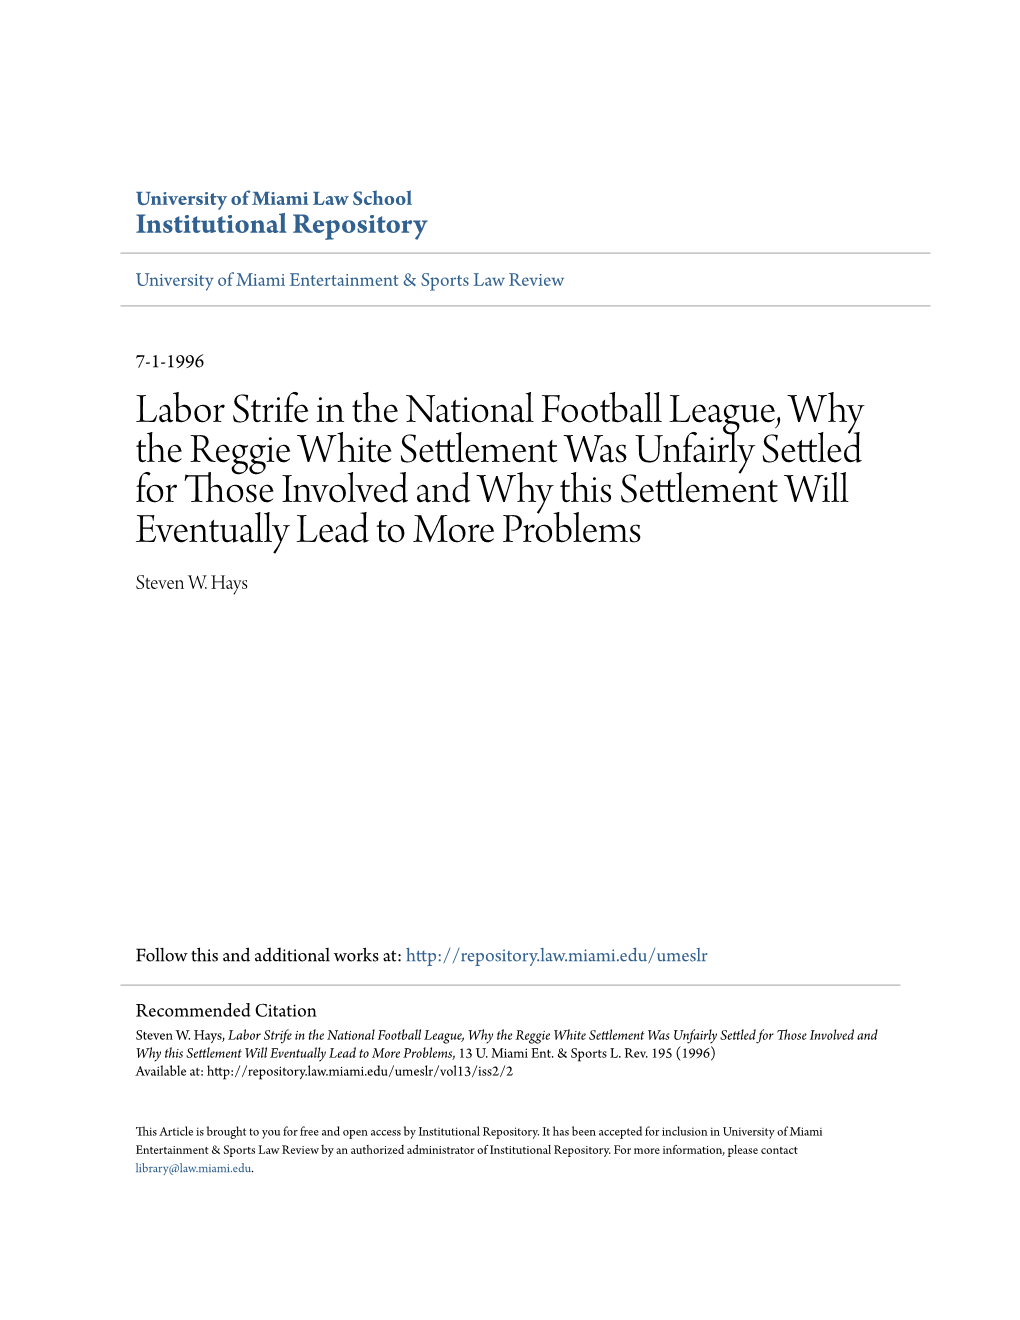 Labor Strife in the National Football League, Why the Reggie White